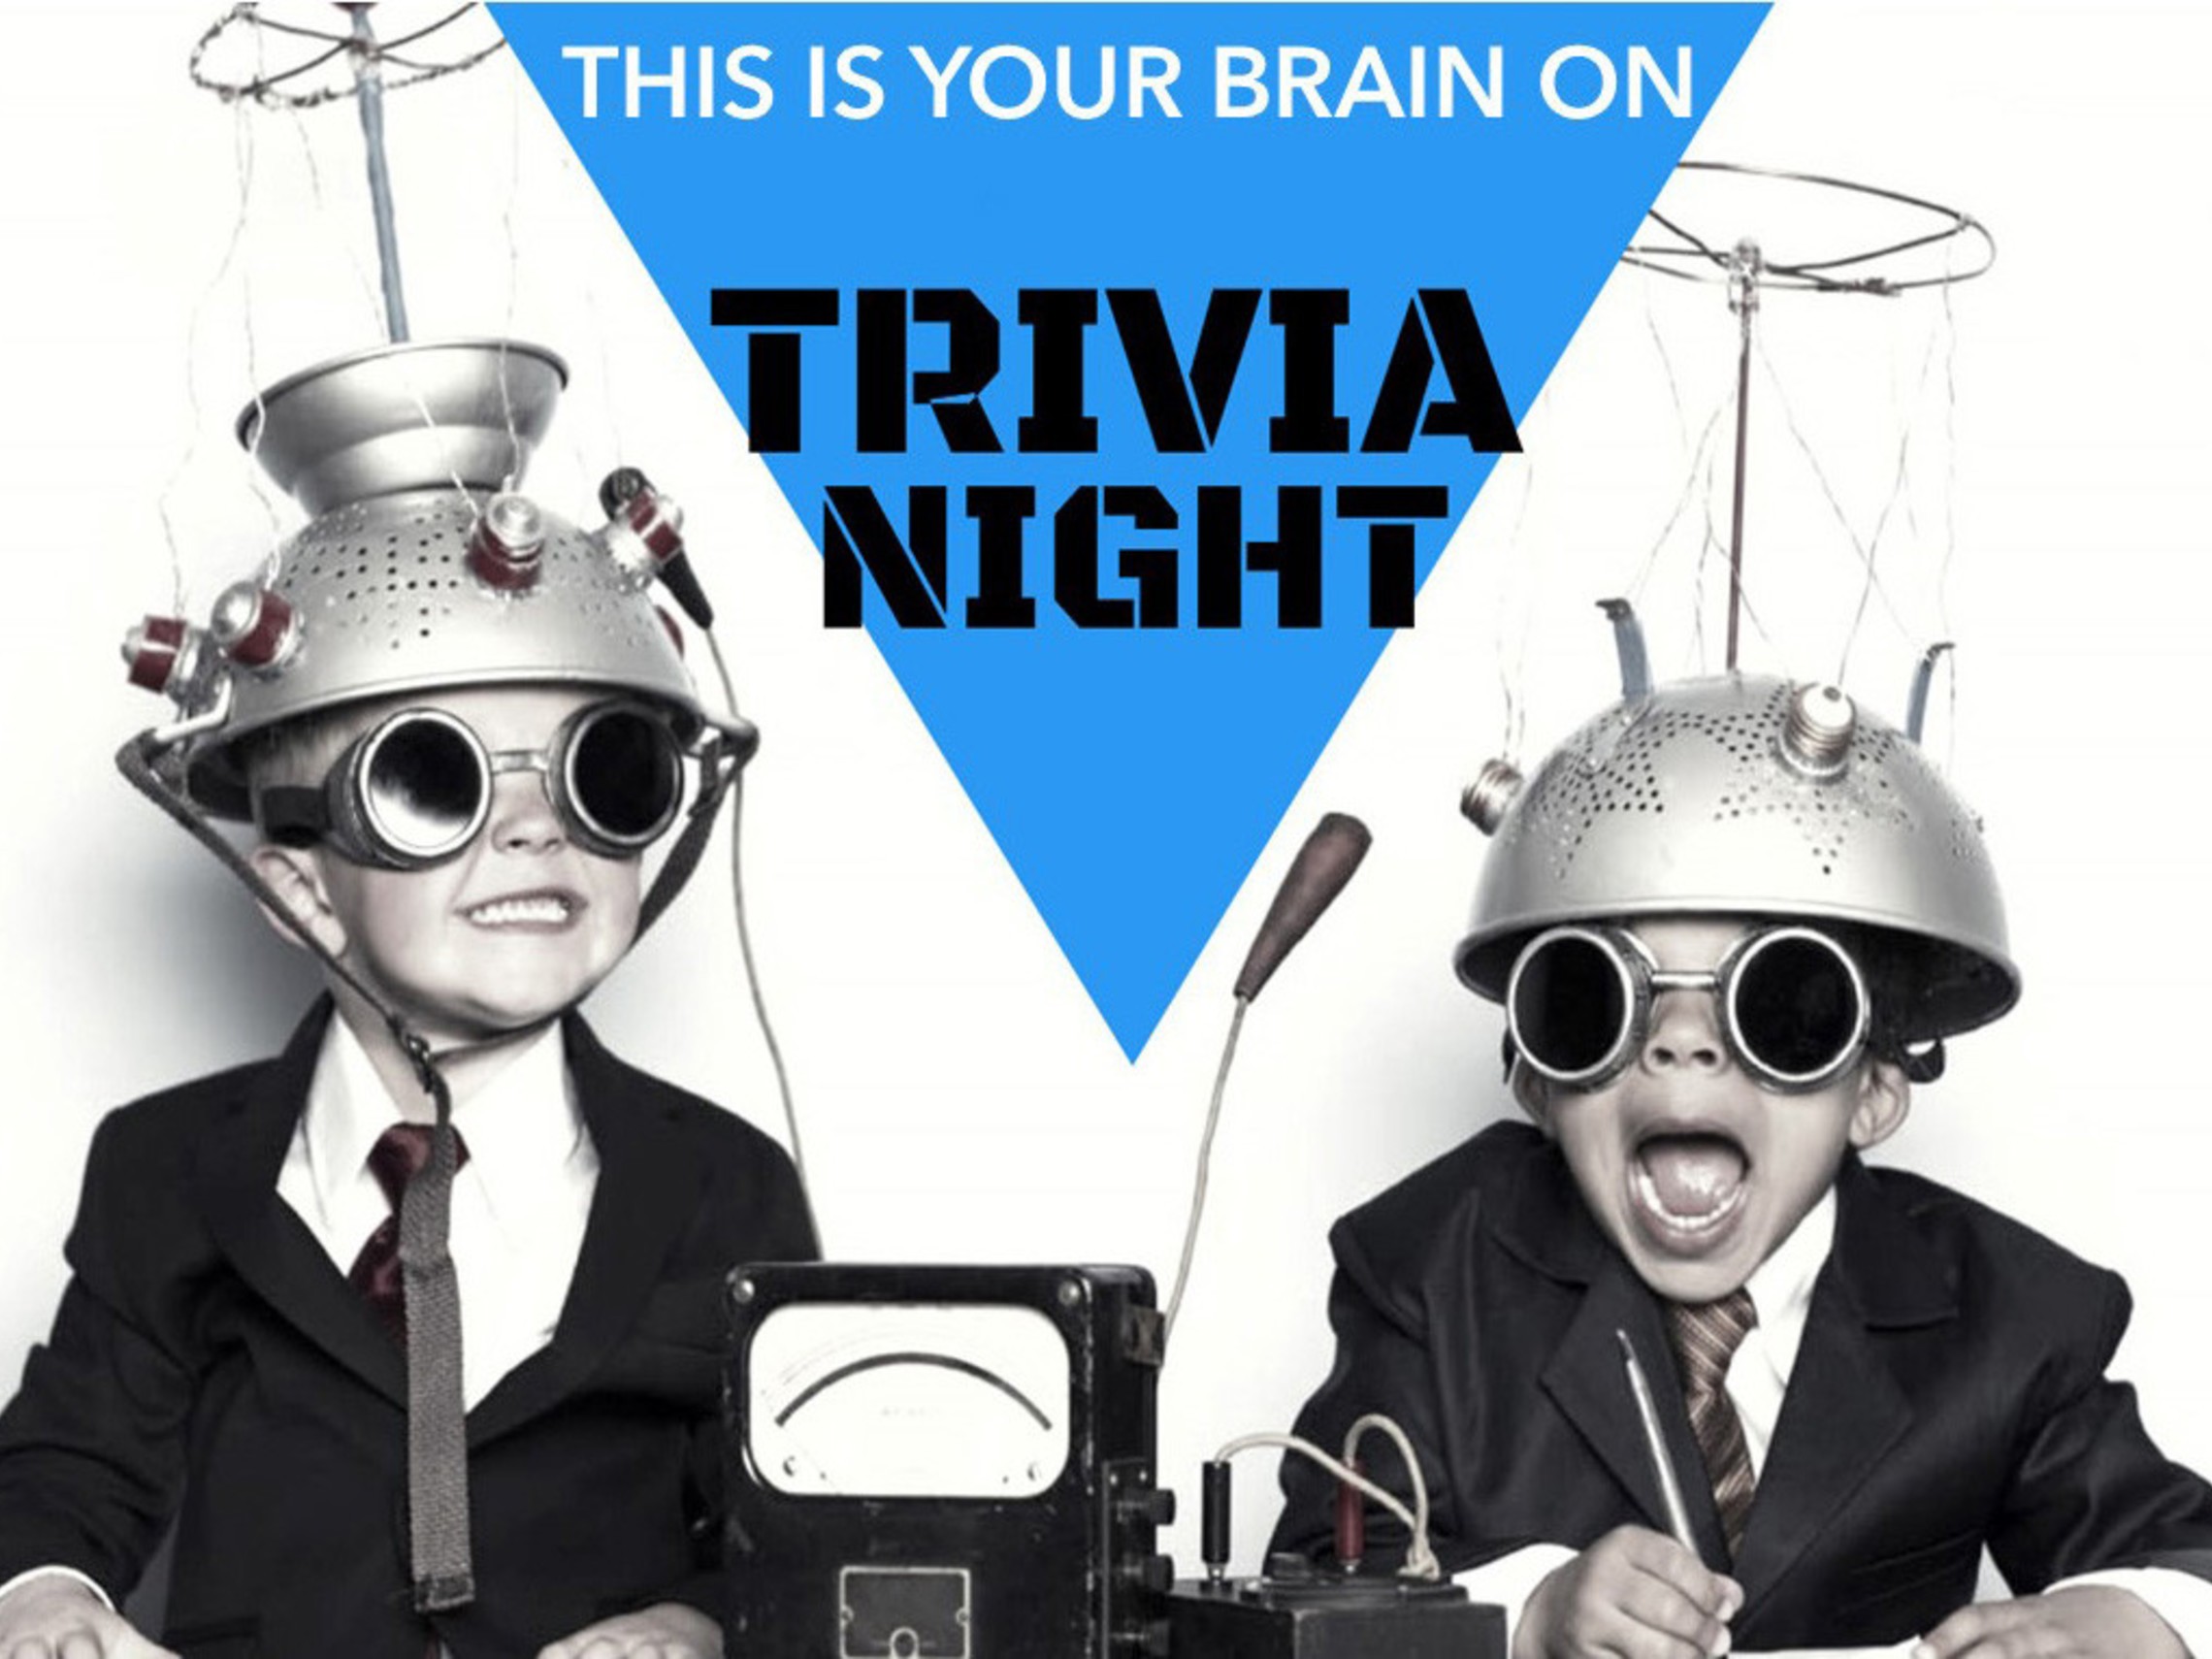 Trivia Night at Our Lady of Lourdes  - Wear your thinking cap!